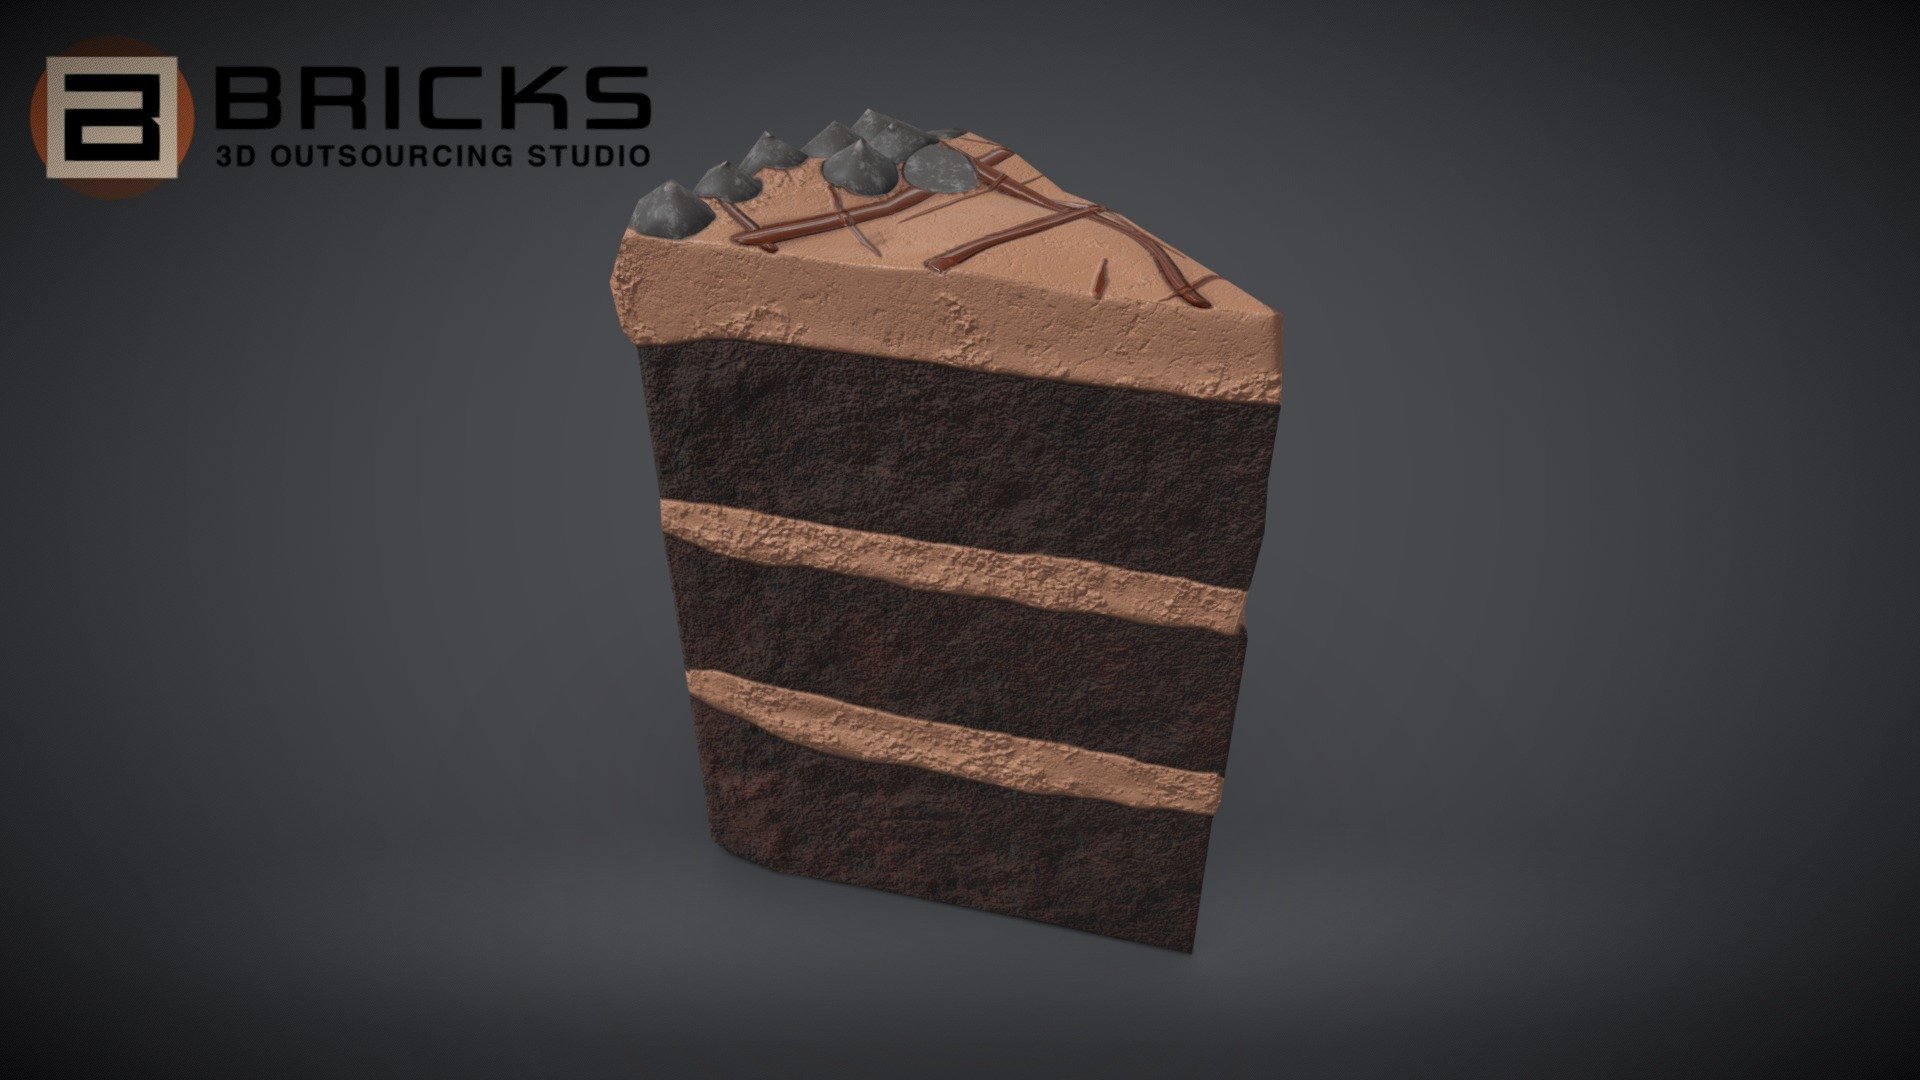 PBR Food Asset:
ChocolateGateau_Piece
Polycount: 462
Vertex count: 233
Texture Size: 2048px x 2048px
Normal: OpenGL

If you need any adjust in file please contact us: team@bricks3dstudio.com

Hire us: tringuyen@bricks3dstudio.com
Here is us: https://www.bricks3dstudio.com/
        https://www.artstation.com/bricksstudio
        https://www.facebook.com/Bricks3dstudio/
        https://www.linkedin.com/in/bricks-studio-b10462252/ - ChocolateGateauPiece - Buy Royalty Free 3D model by Bricks Studio (@bricks3dstudio) 3d model